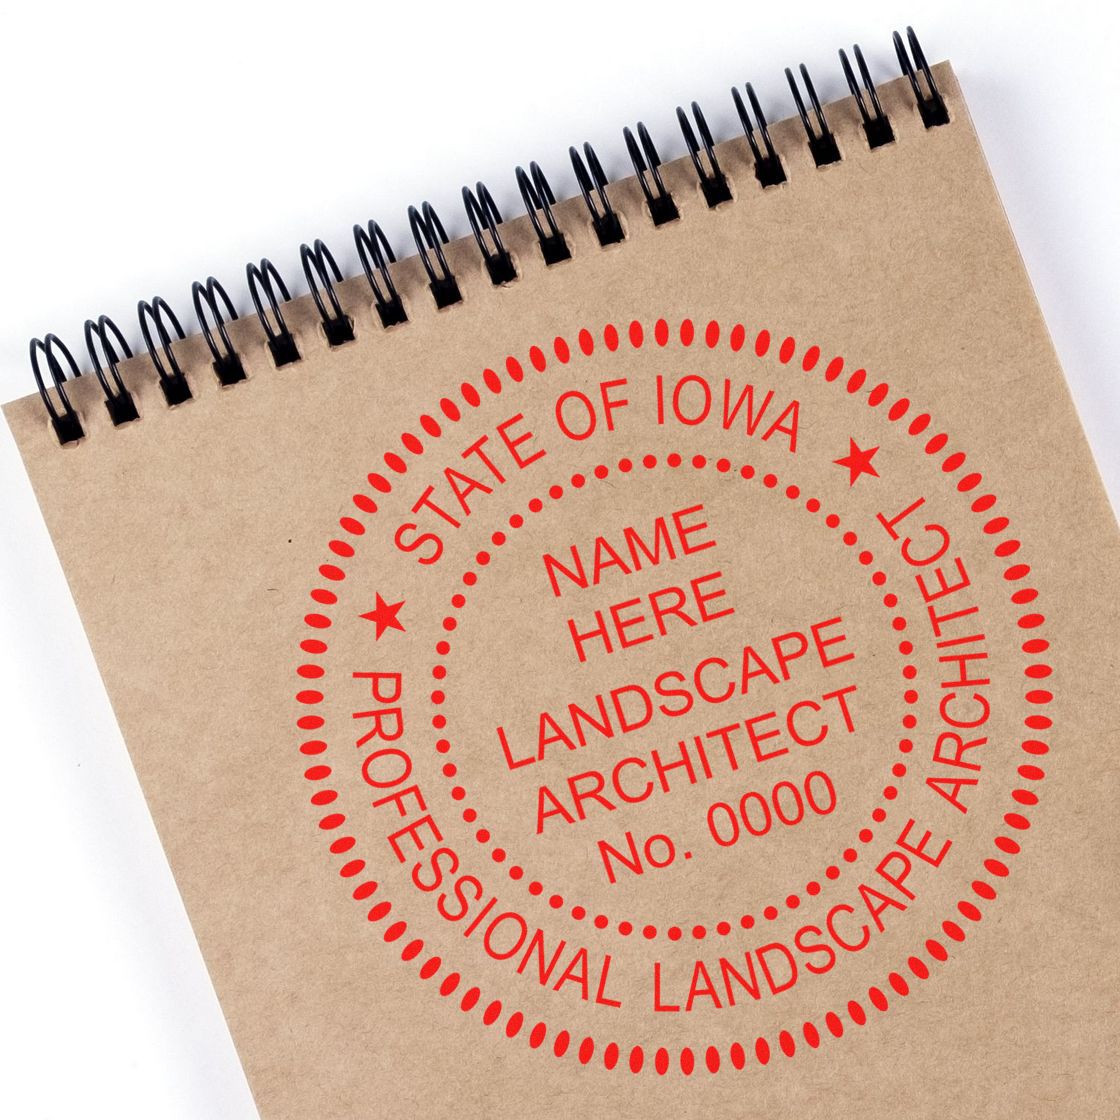 A stamped impression of the Self-Inking Iowa Landscape Architect Stamp in this stylish lifestyle photo, setting the tone for a unique and personalized product.